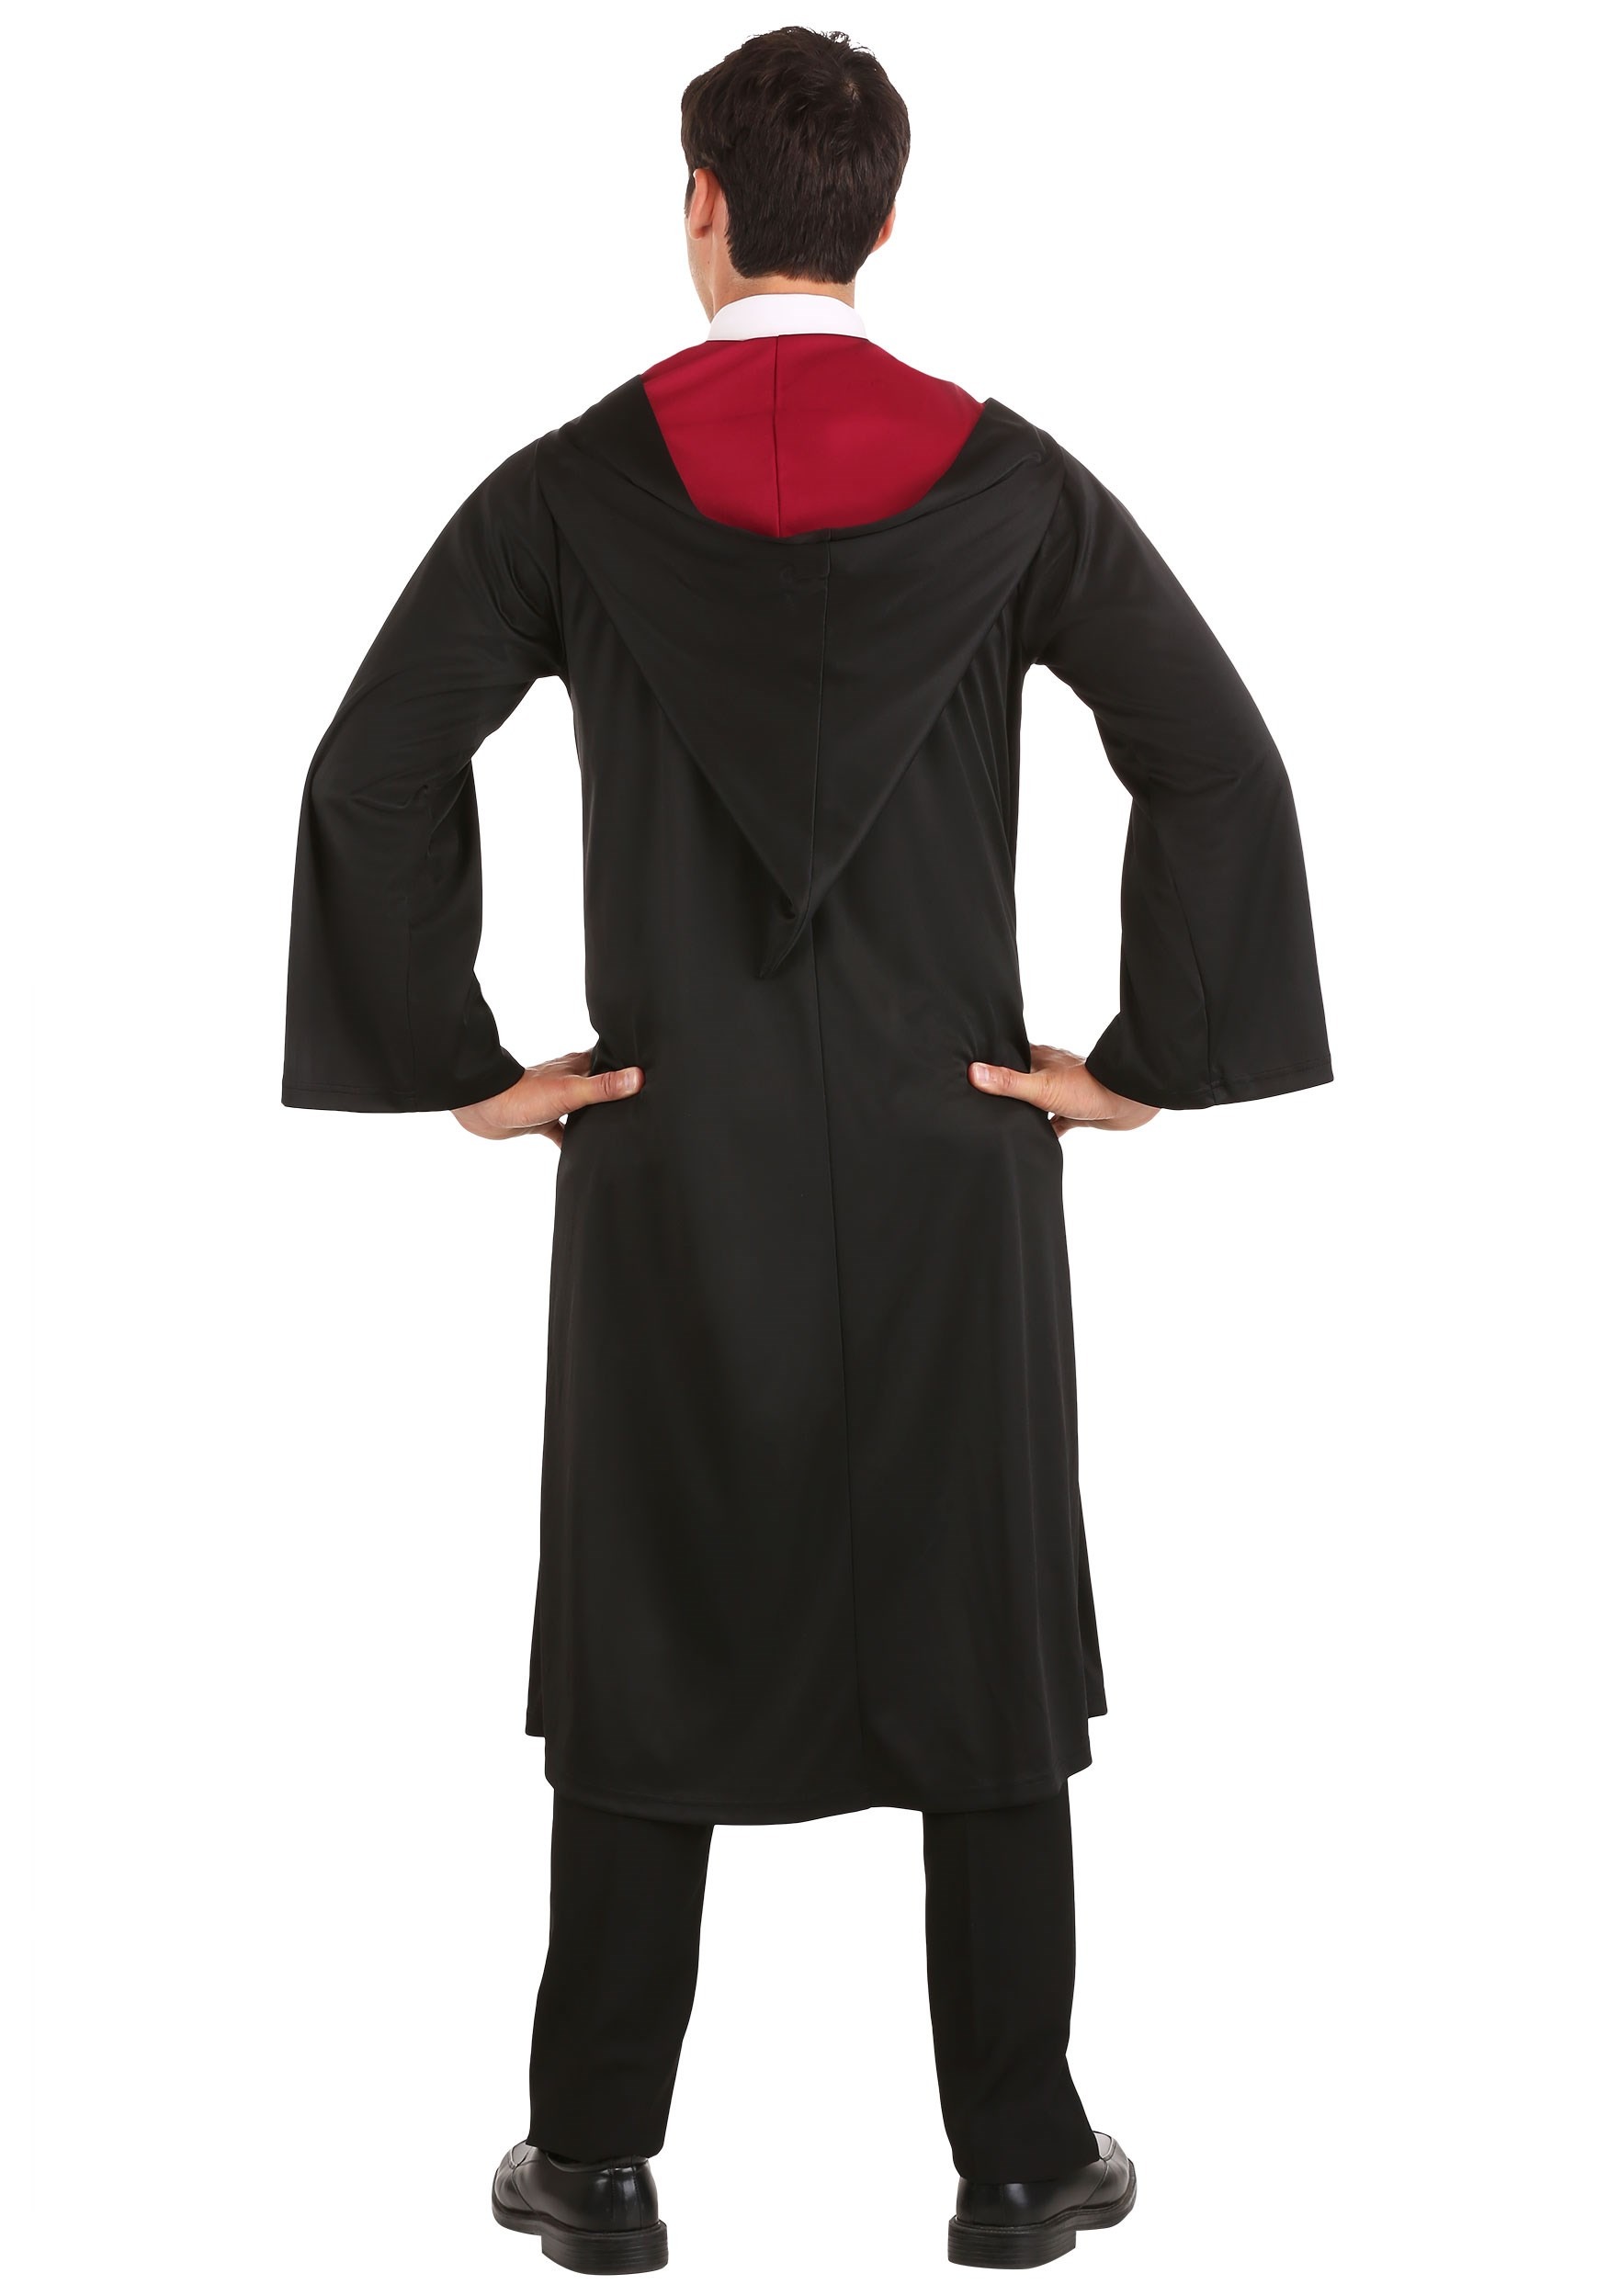 Harry Potter Gryffindor Robe Costume For Adults